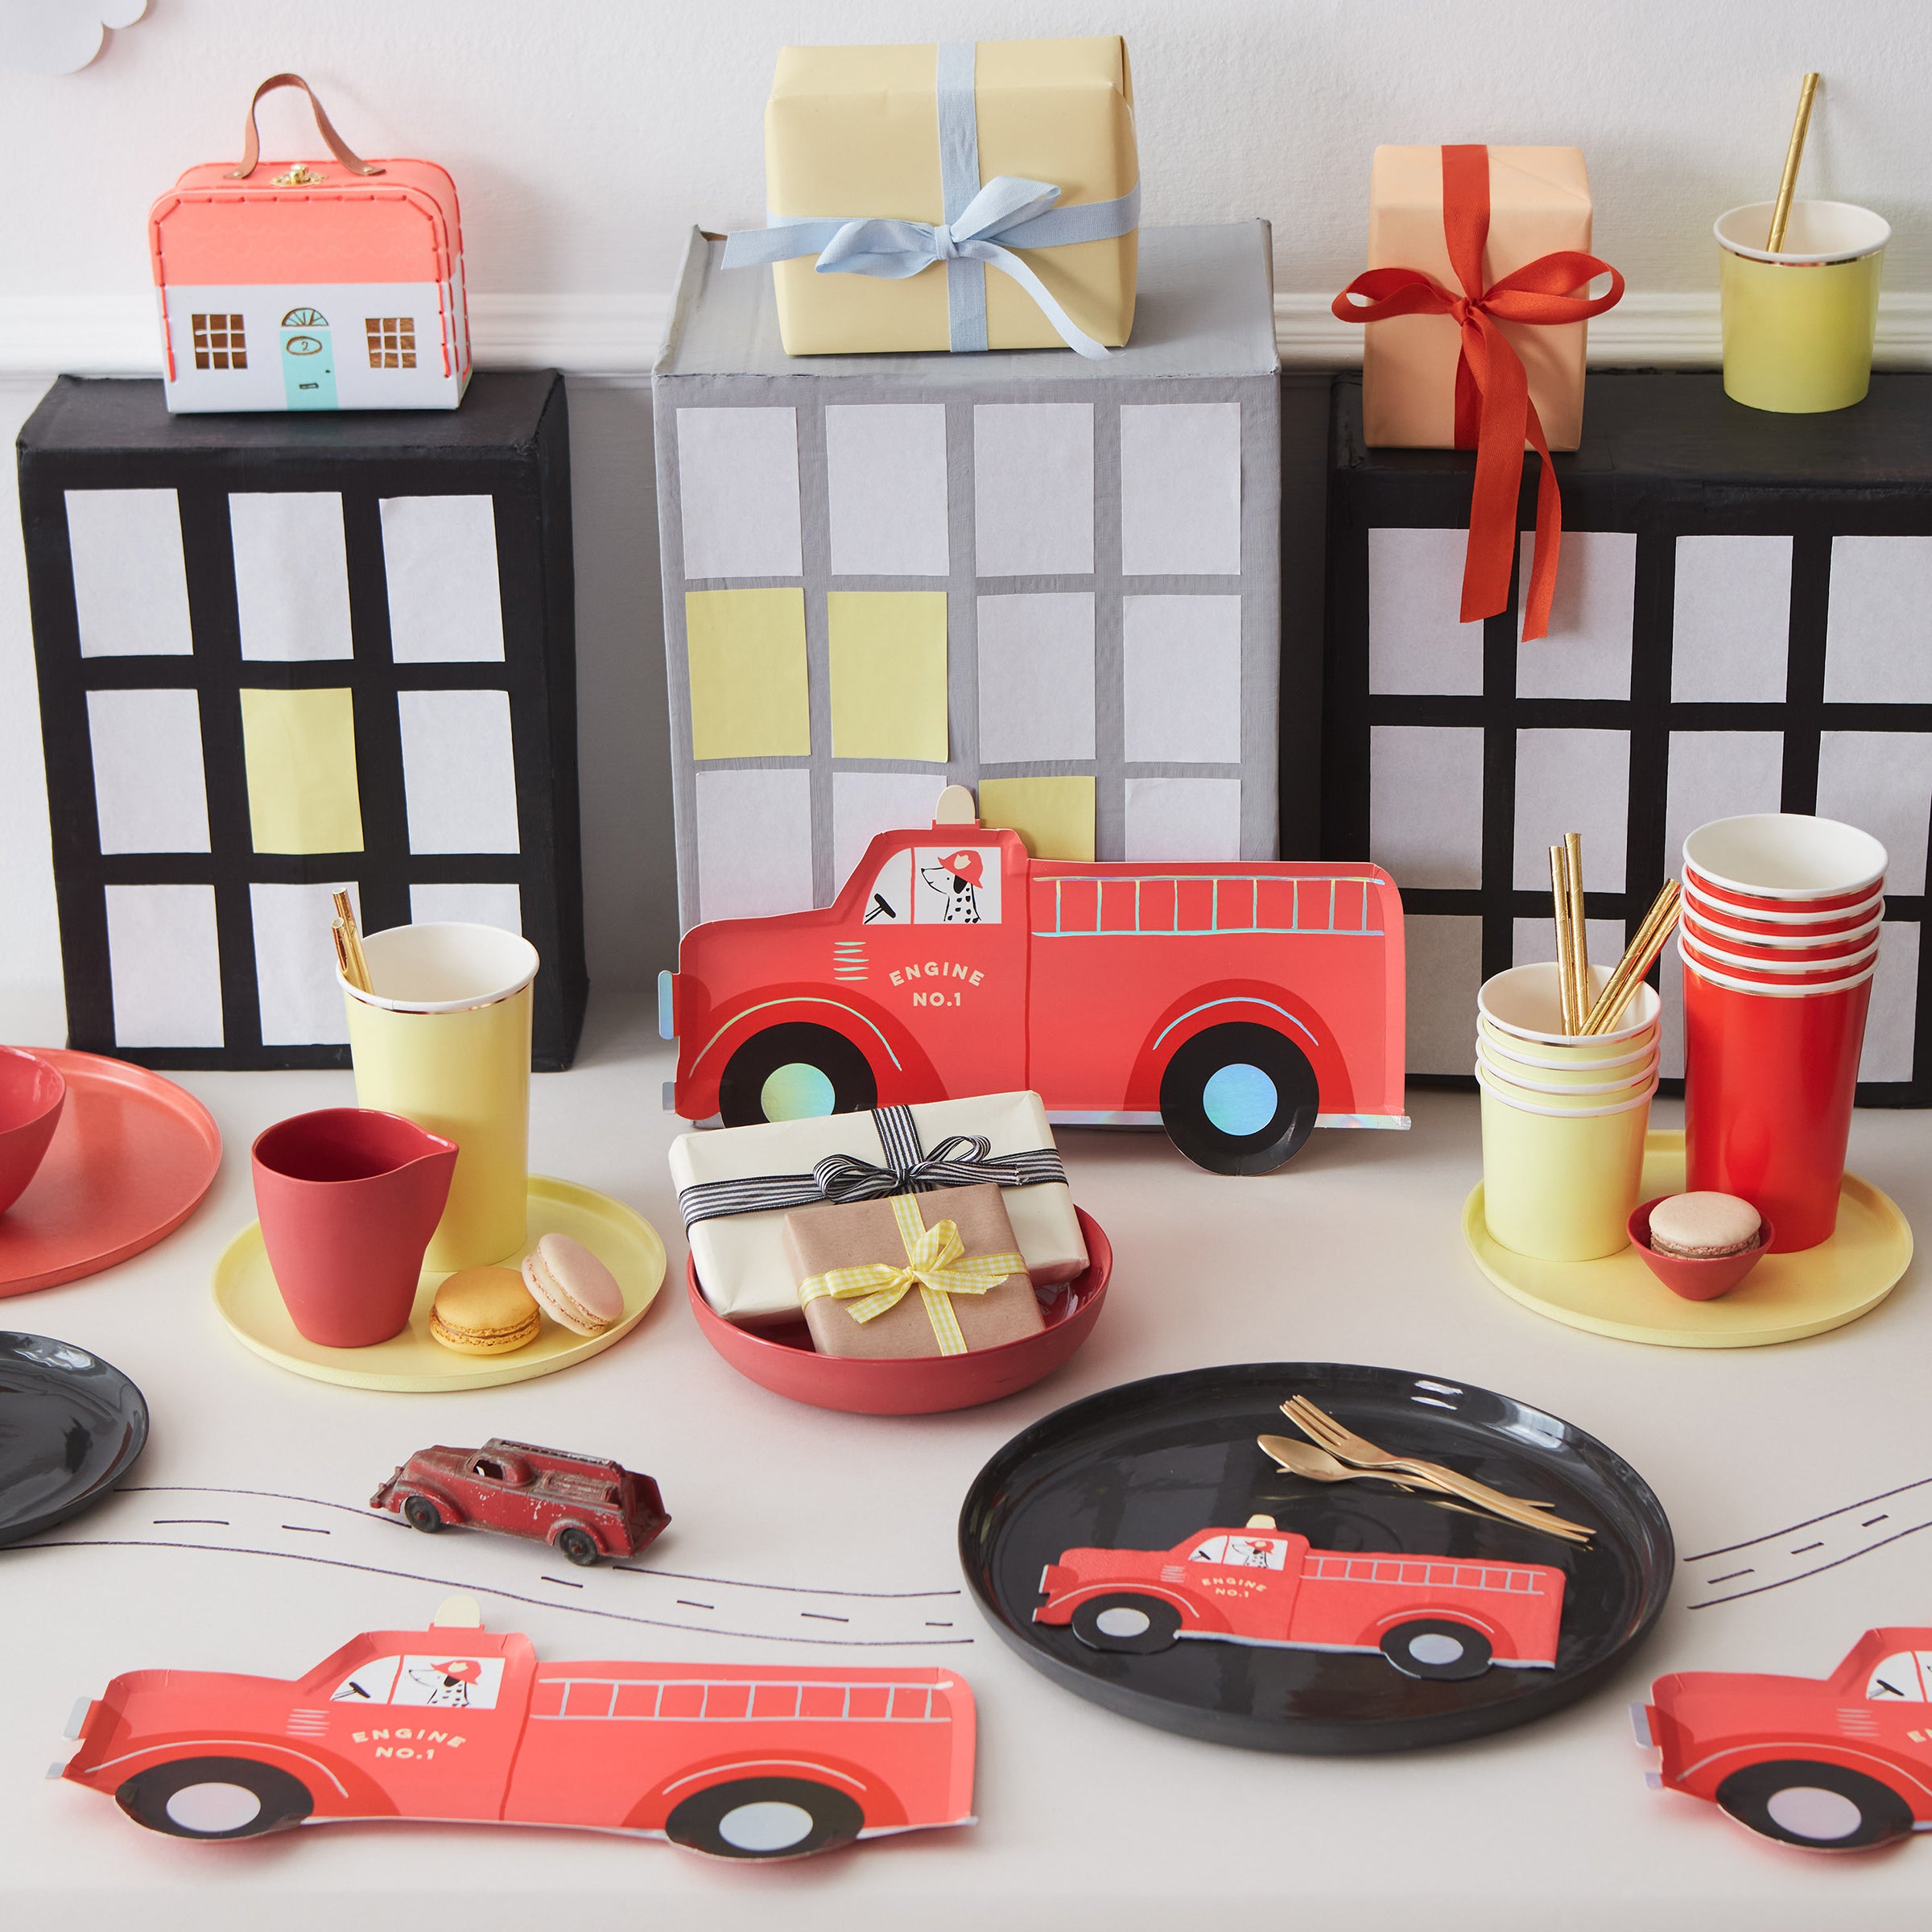 These wonderful plates, featuring a fire truck and lots of shiny holographic foil, will look amazing as a boys party theme.